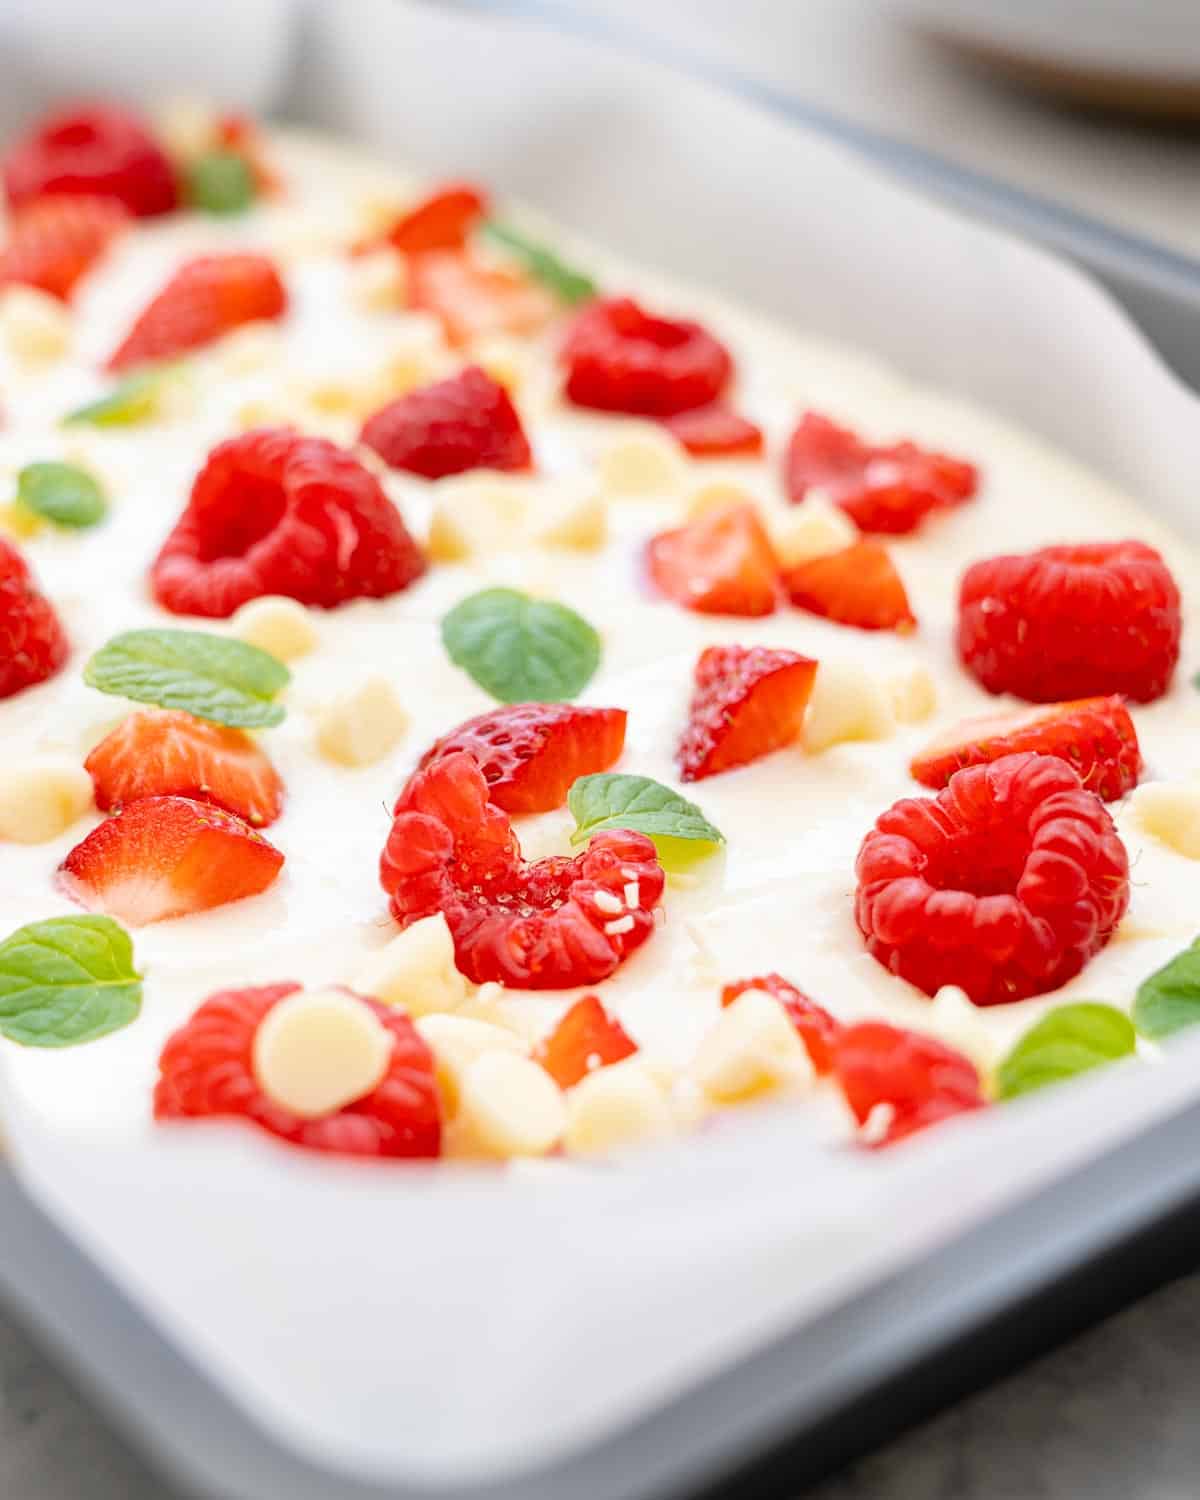 A close up of the yoghurt bark which has a scattering of raspberries, strawberries and choclate drops 